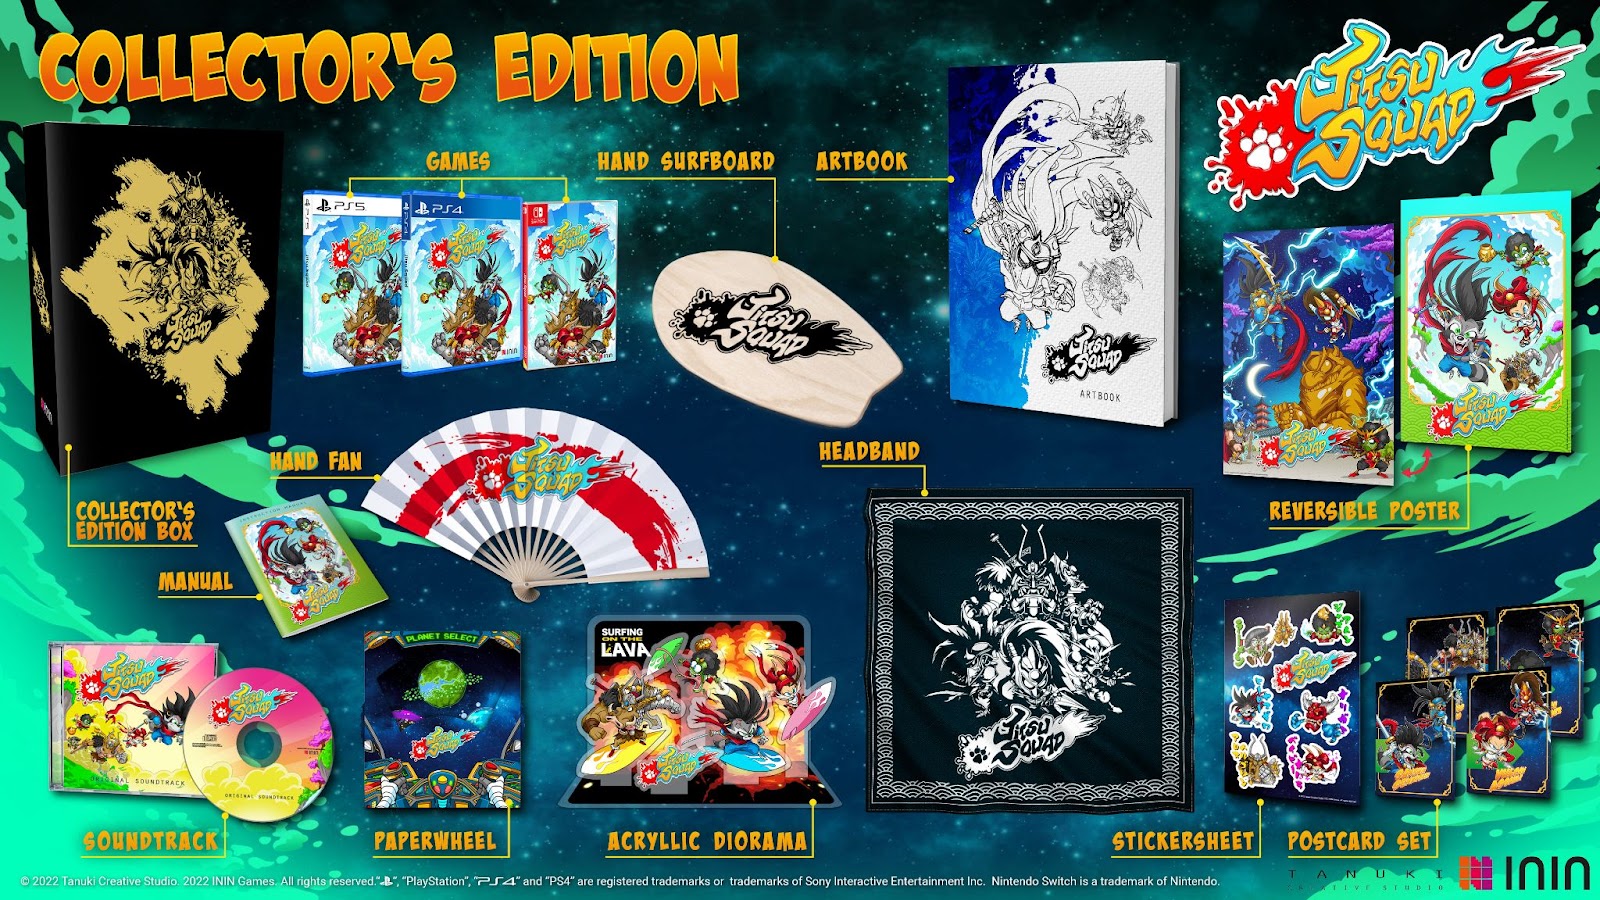 Collector's Edition contents show.